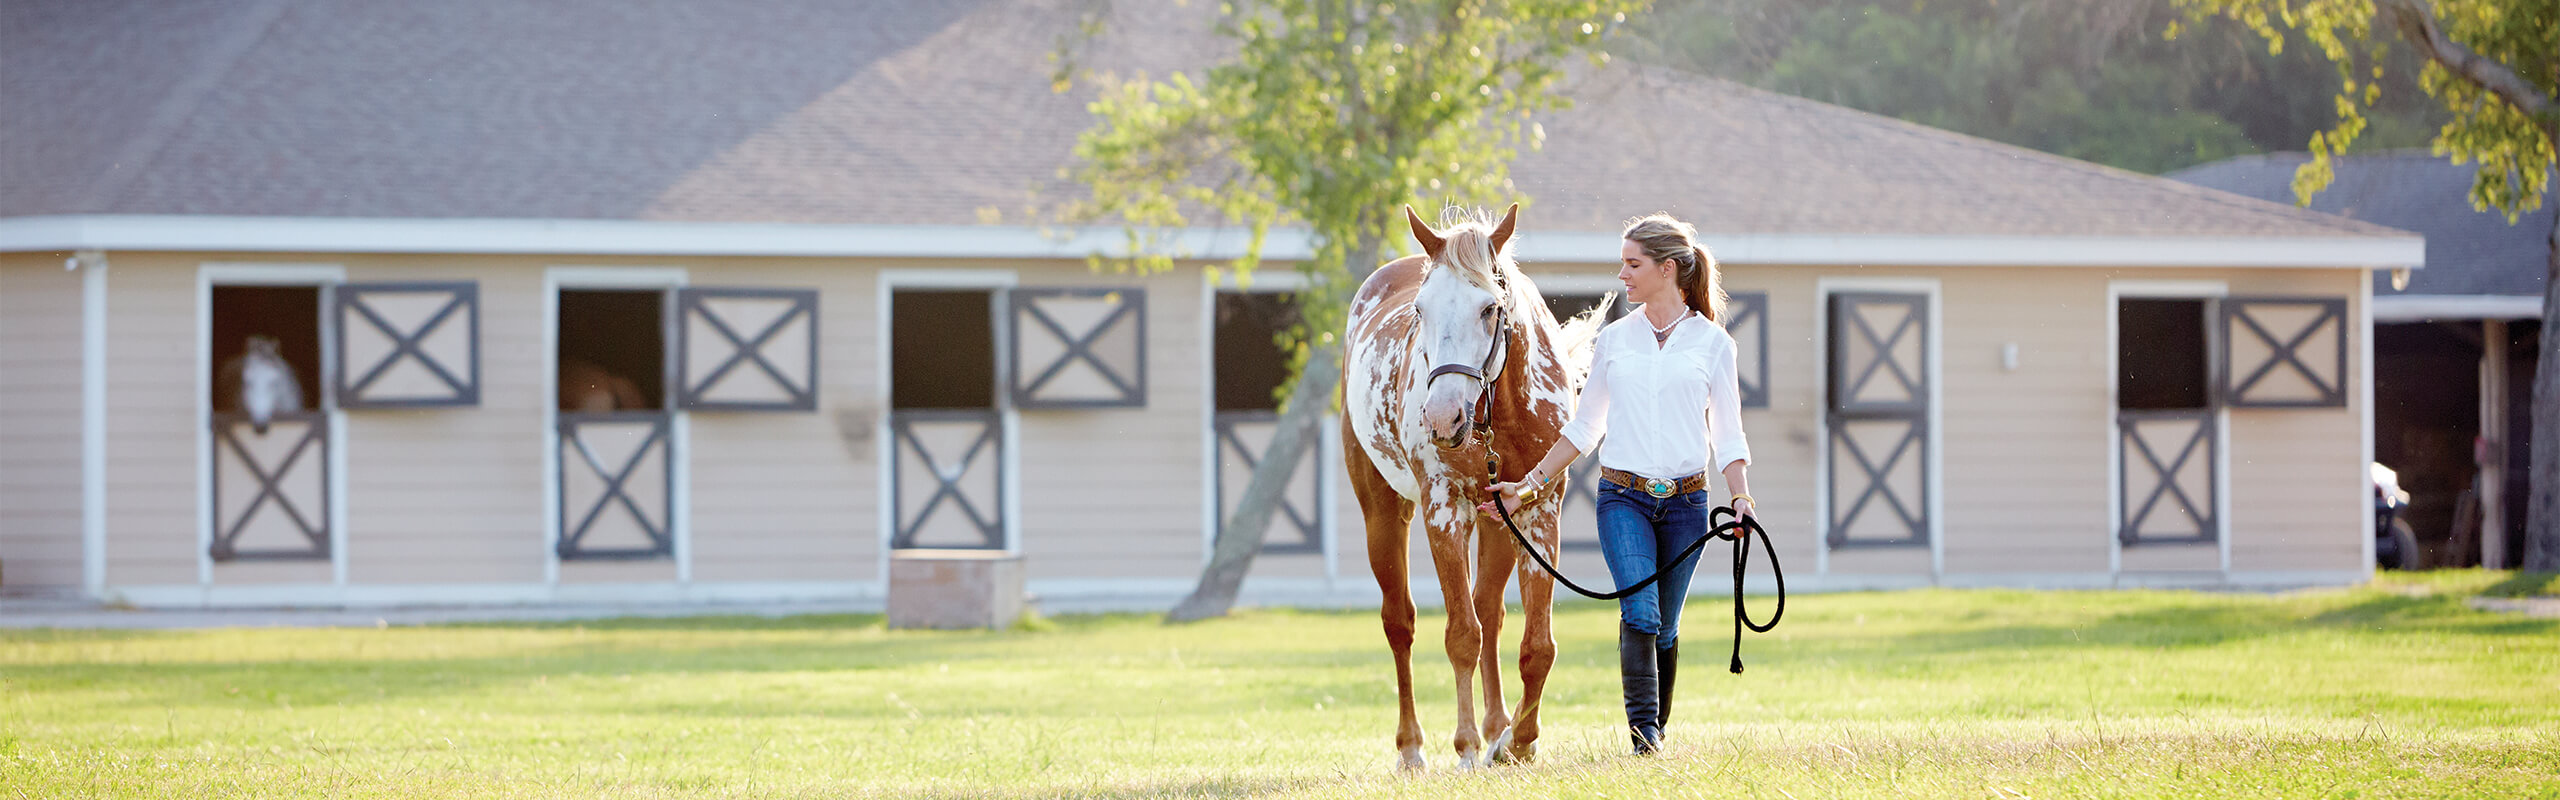 Rider leading a horse in front of the Seabrook Island Equestrian Center barn